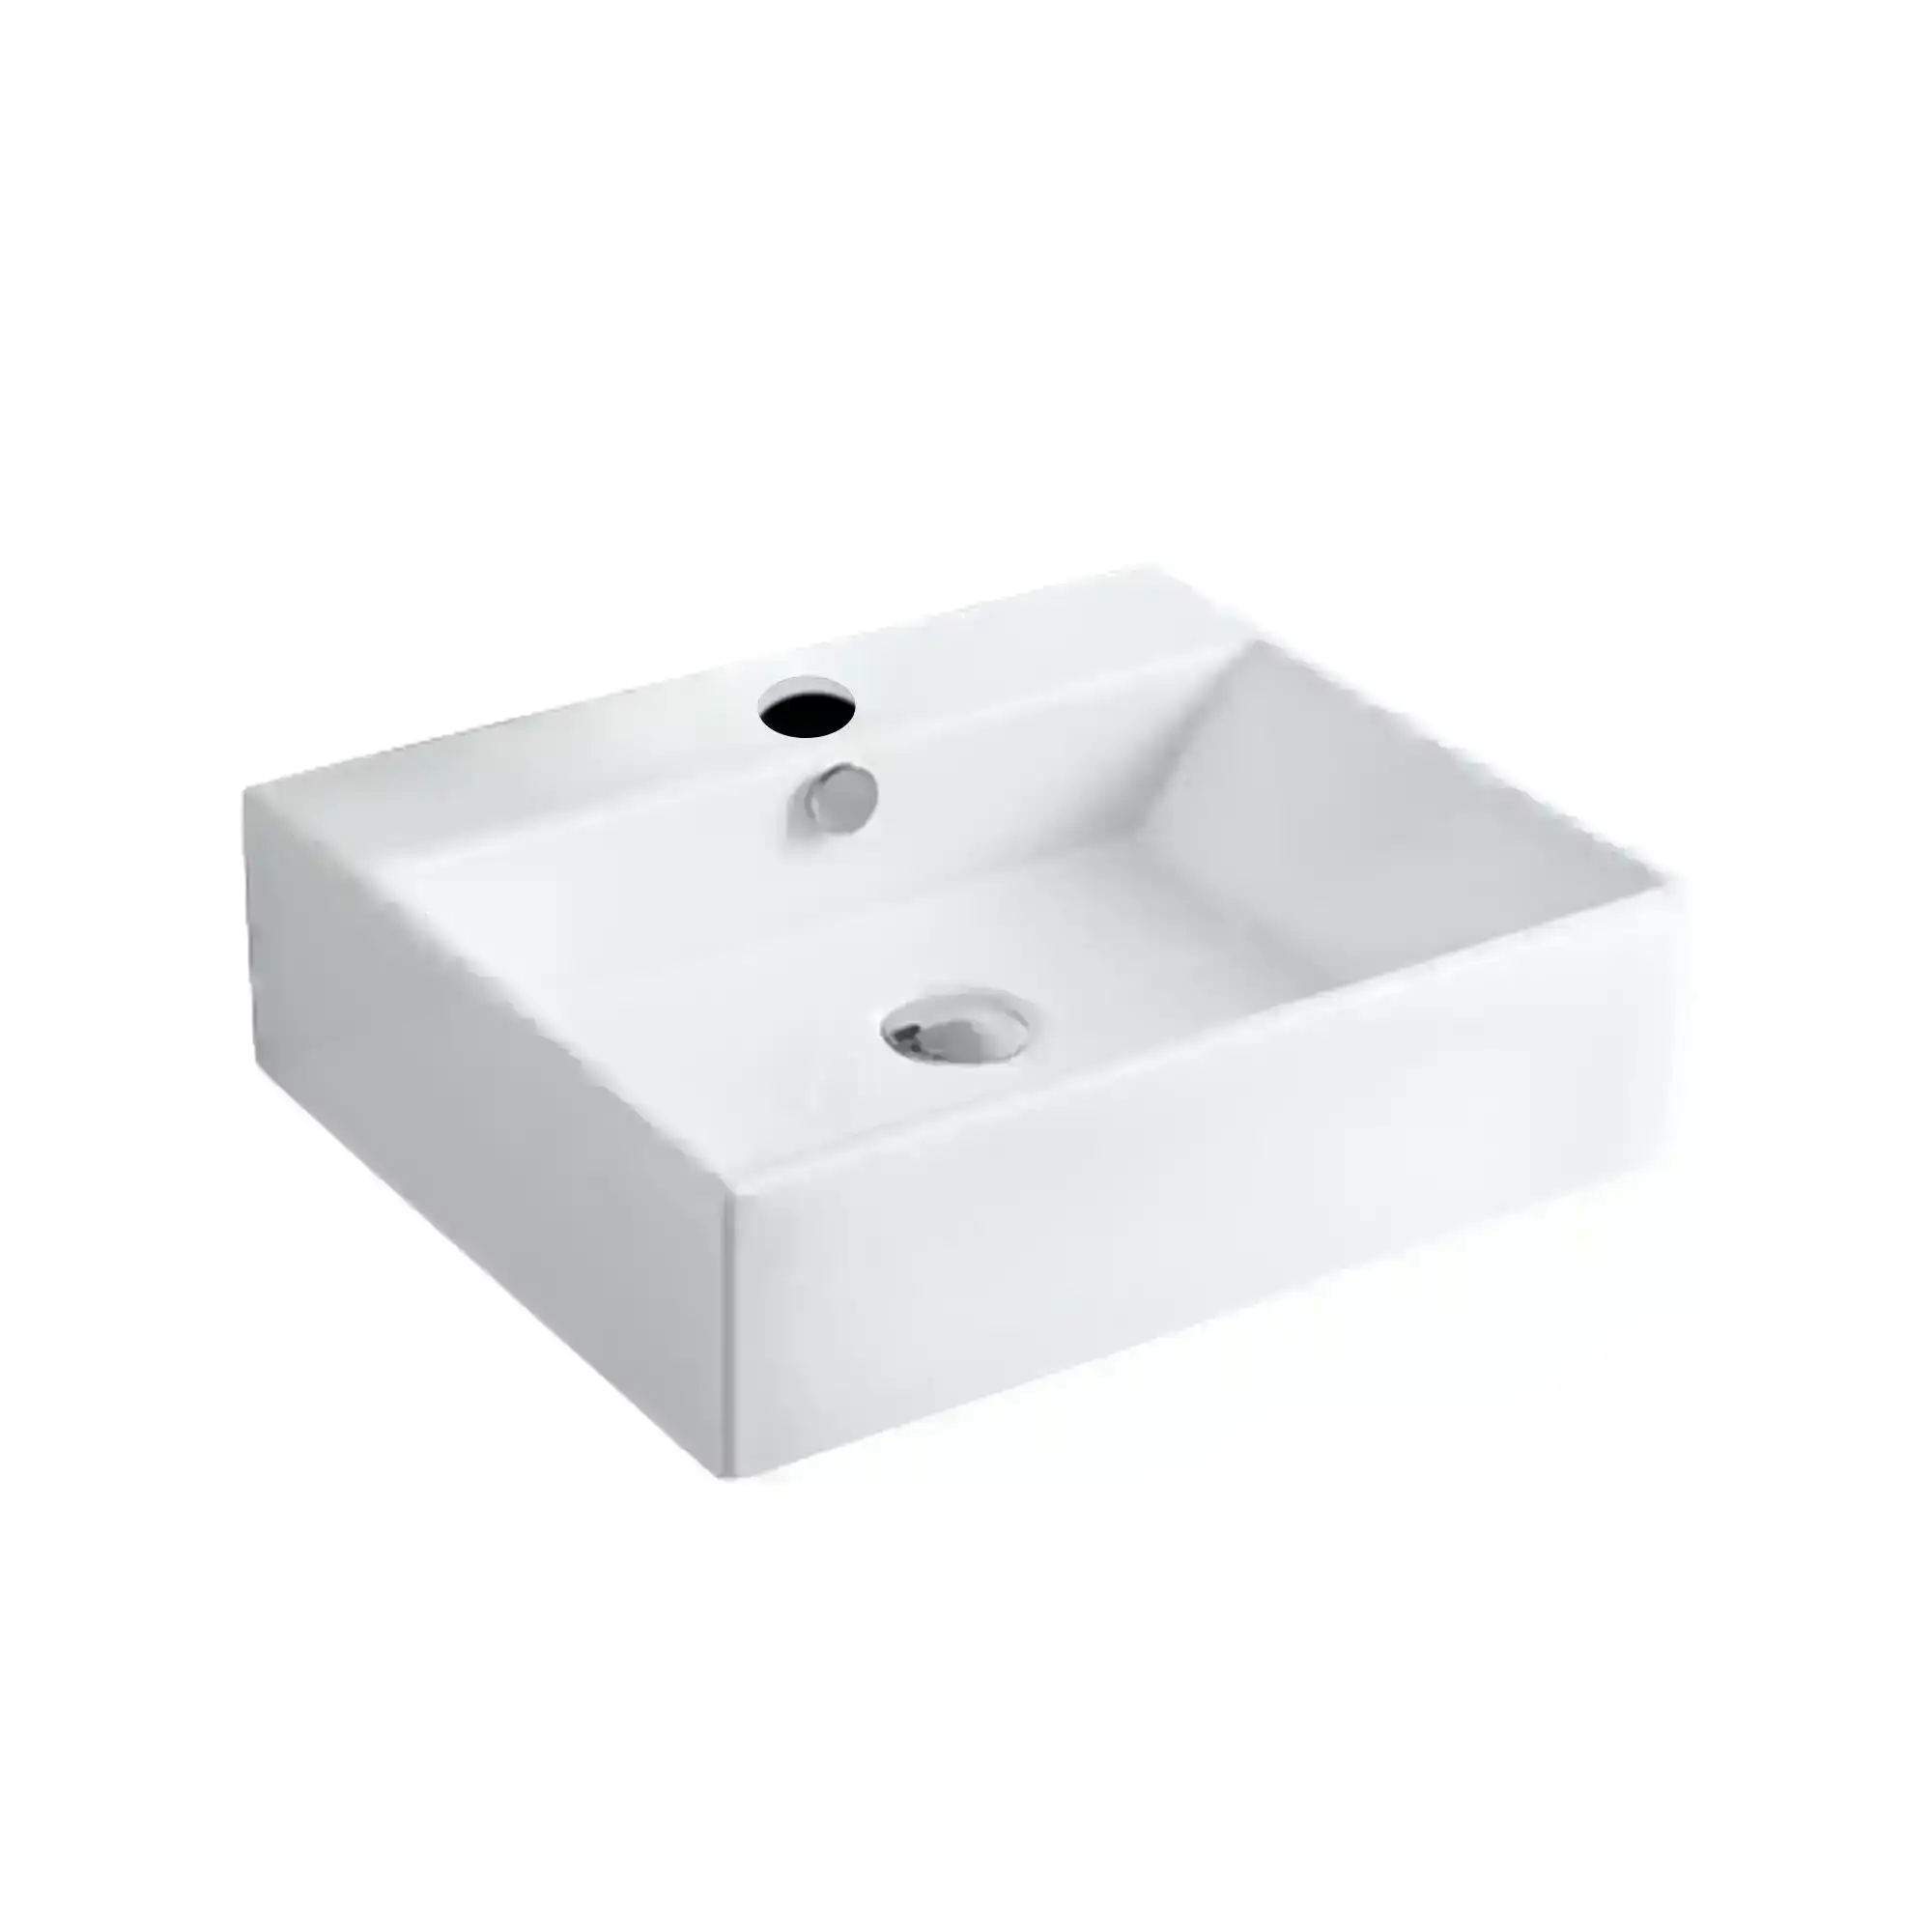 Traderight Group  Ceramic Basin Bathroom Wash Counter Top Hand Wash Sink Vanity Above Rectangle